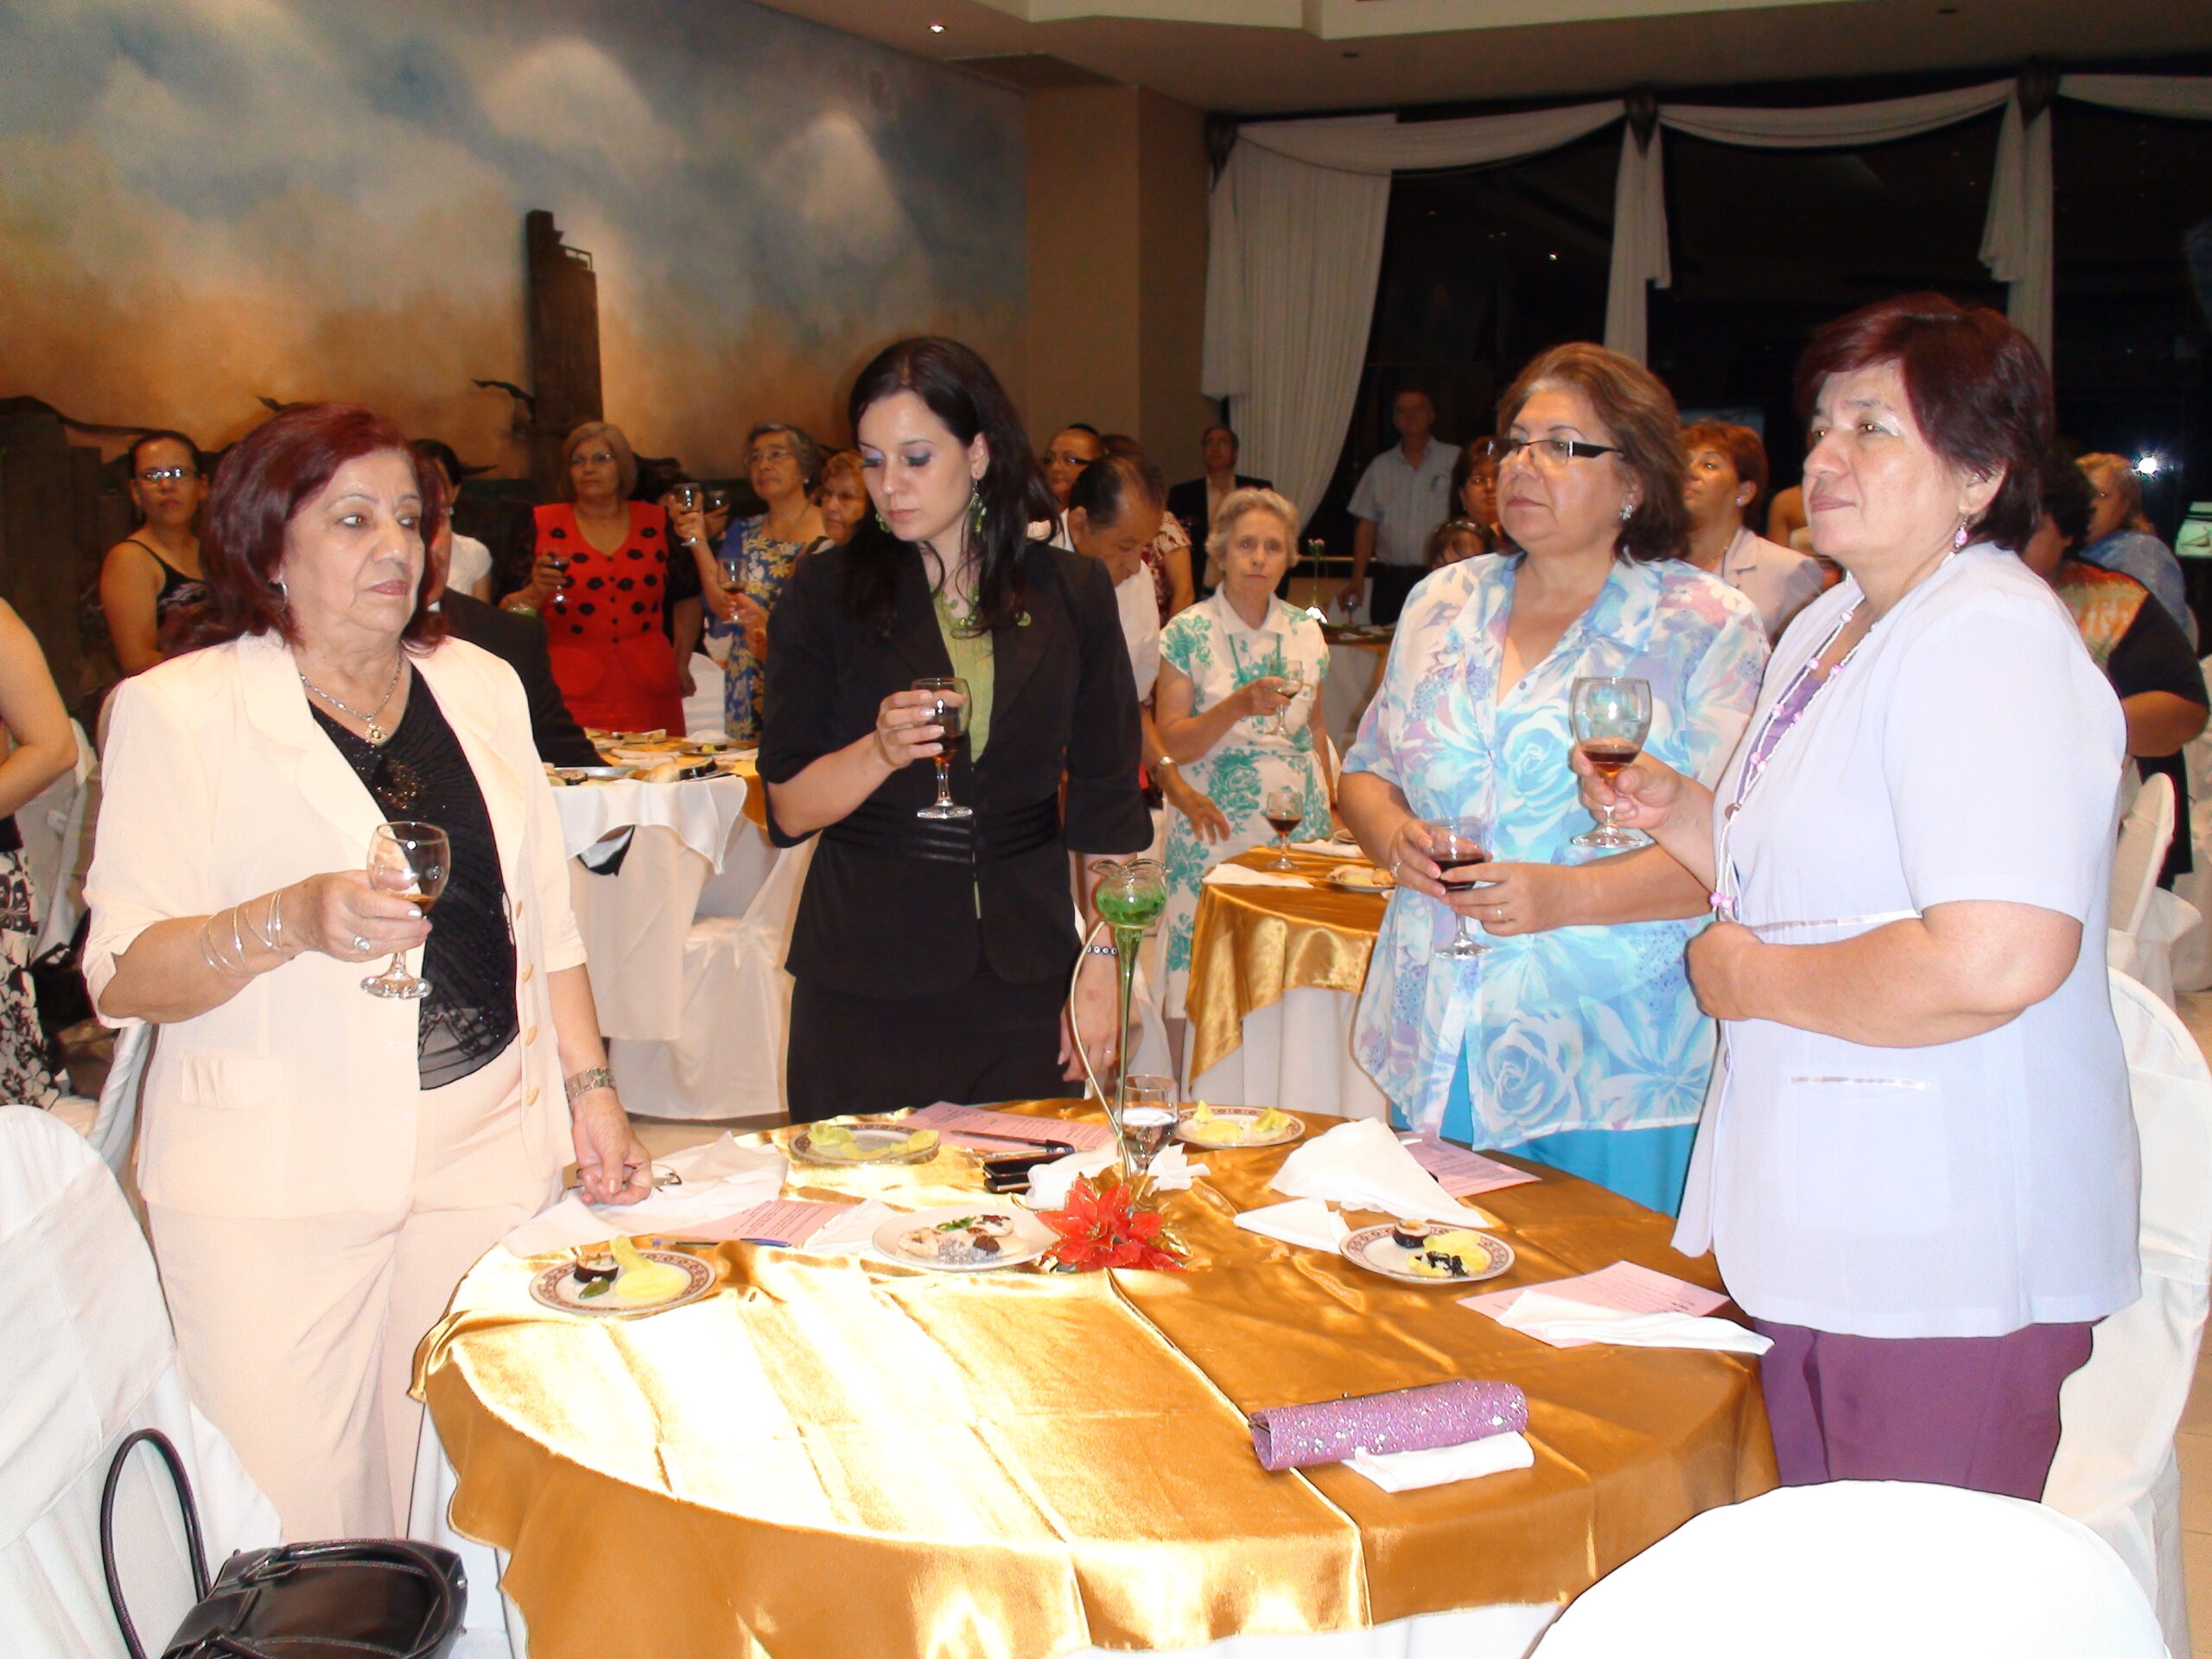 A group of women standing around a table during the Área Mujer's brindis event, celebrating the cierre de actividades.